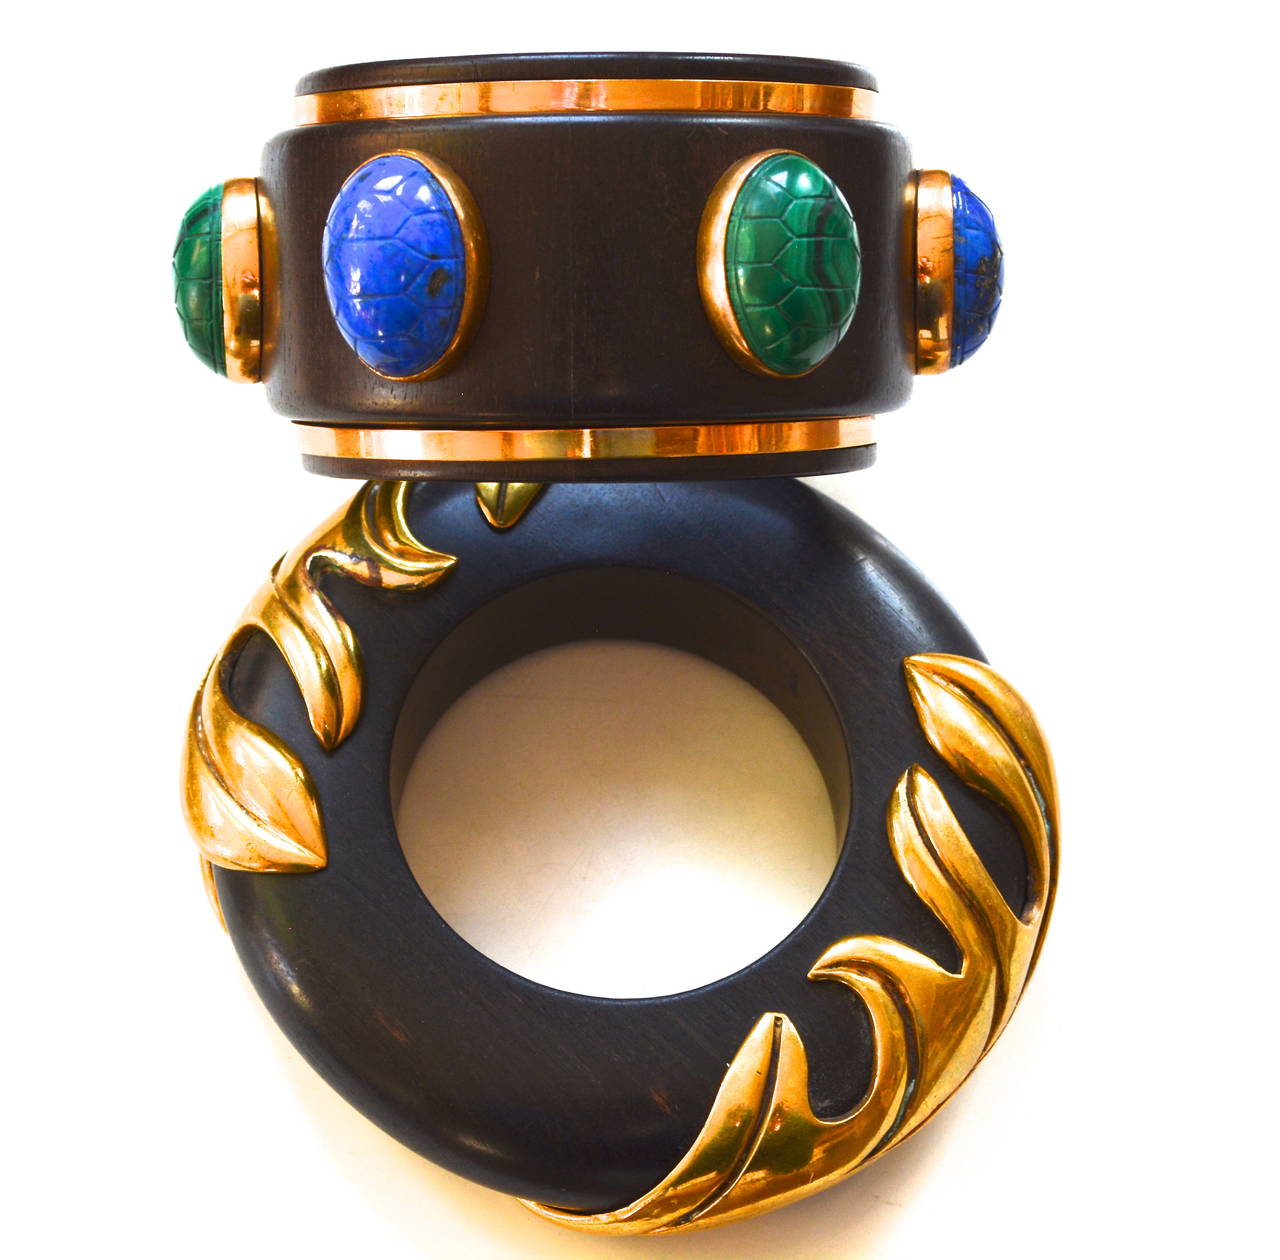 * Will be willing to separate these upon request**
Vintage signed Isabel Canovas cuffs from a collection, circa 1980s. Early desirable limited quantity examples of her work. The large cuff with turtle or scarab precious gemstone cabochons has well